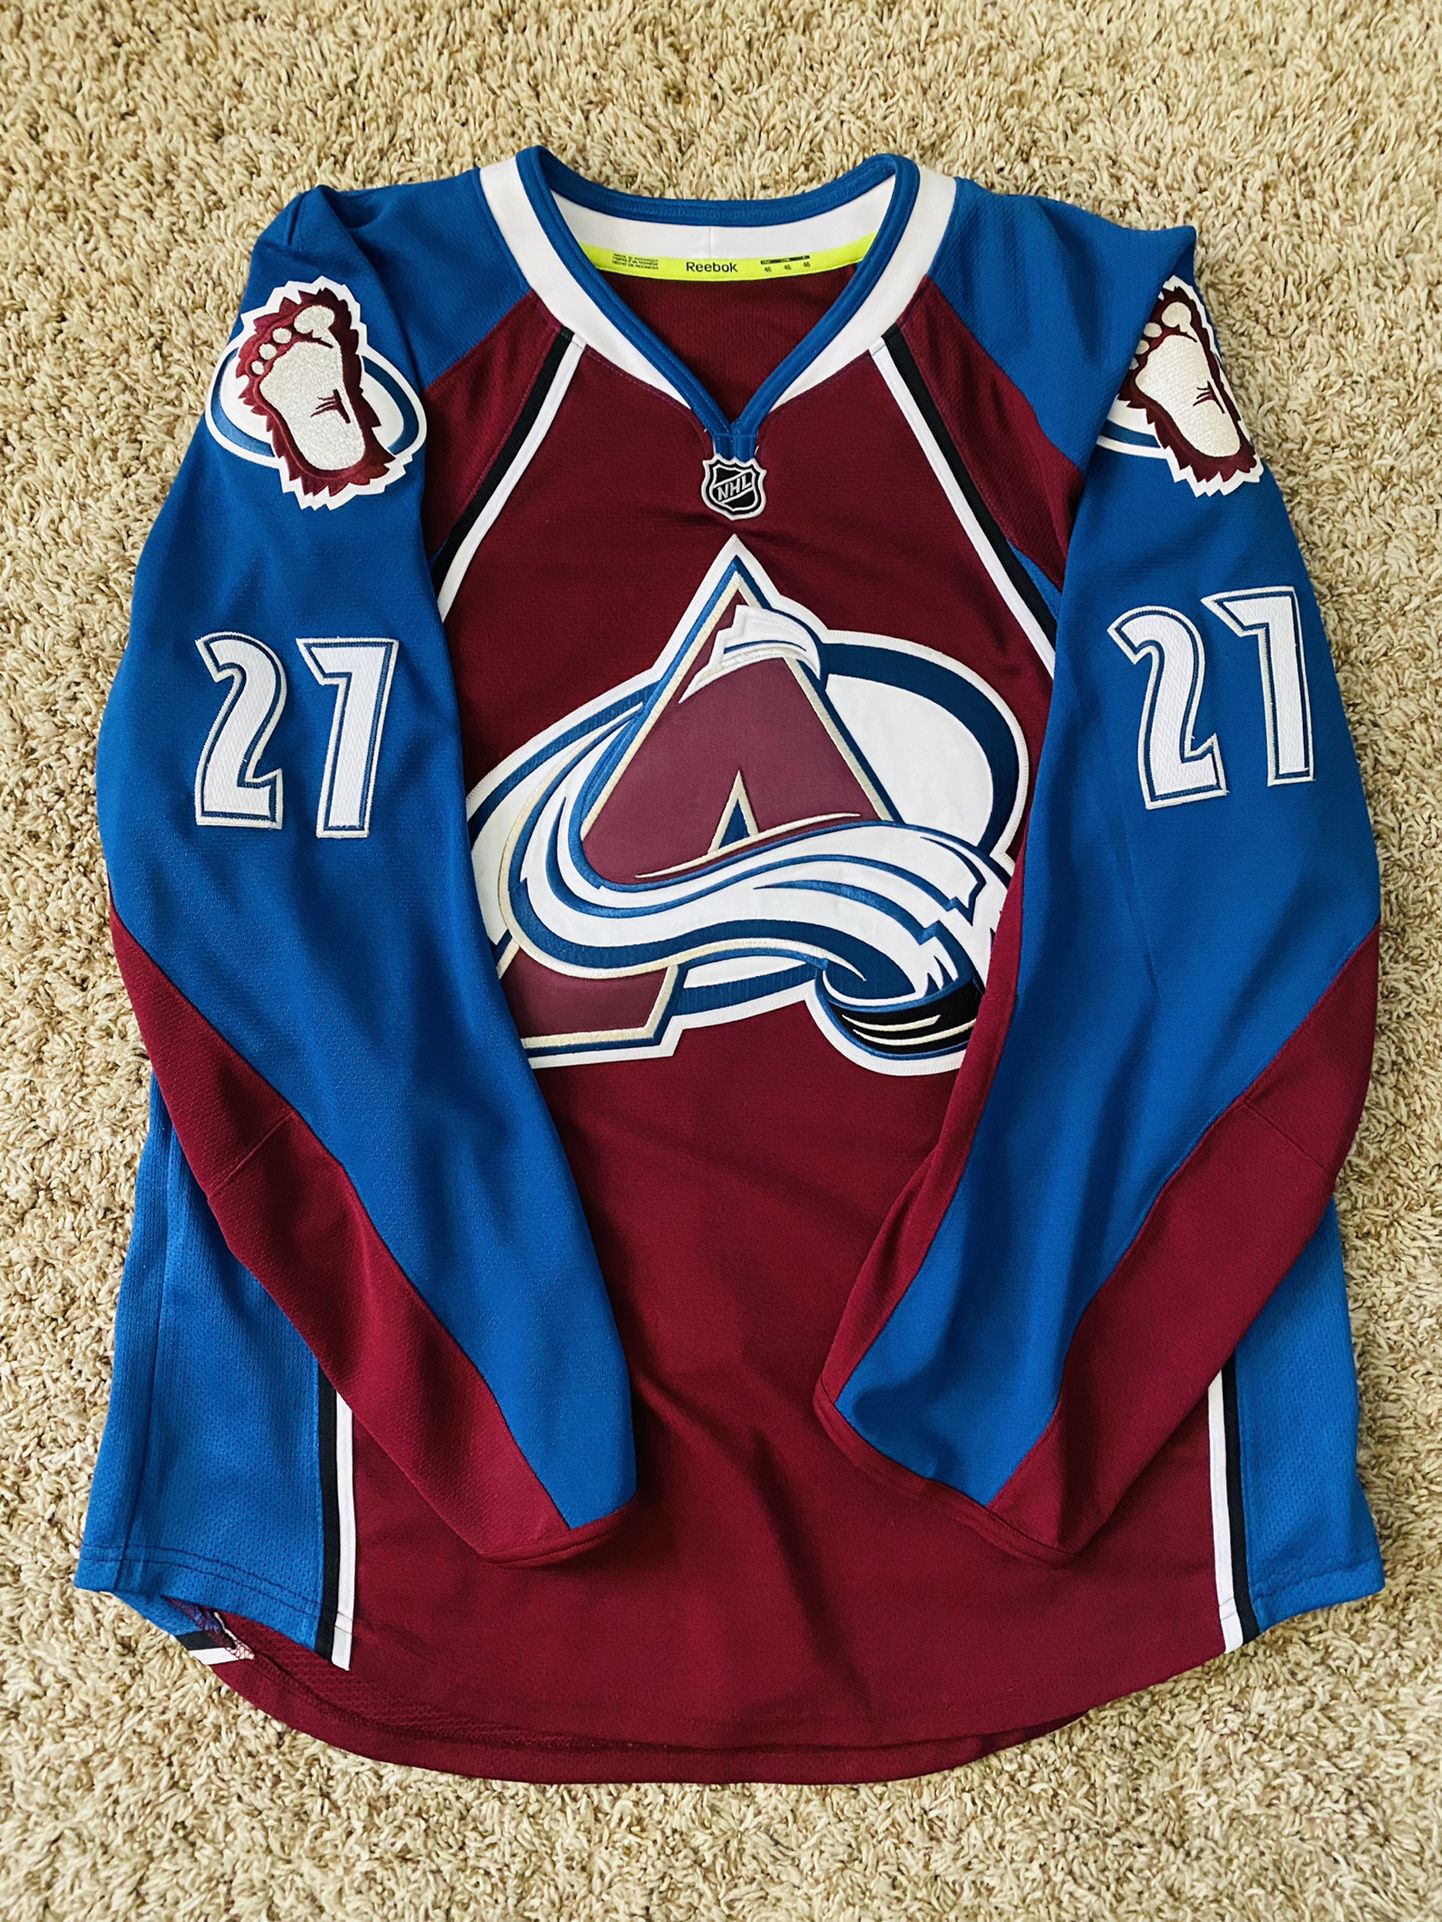 Authentic Colorado Avalanche Sweater (Jersey)